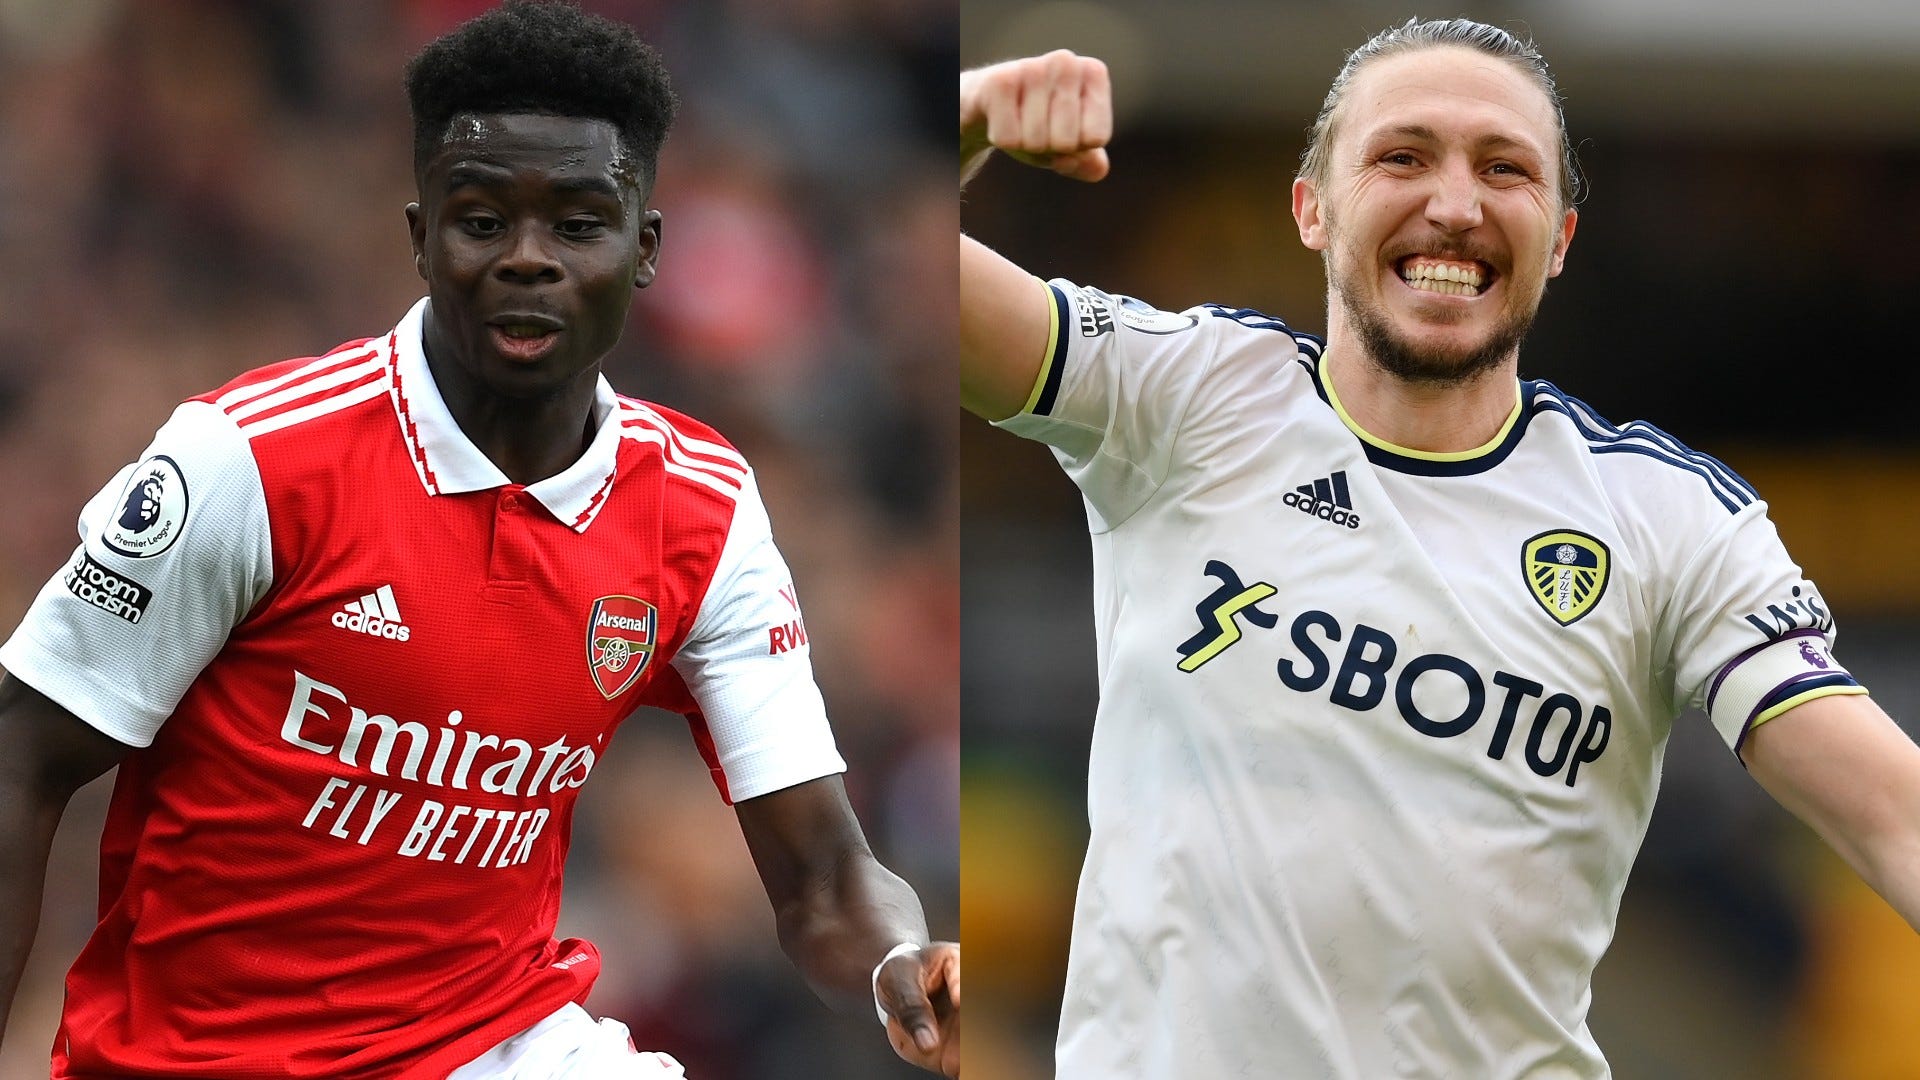 Arsenal vs Leeds United Where to watch the match online, live stream, TV channels and kick-off time Goal US